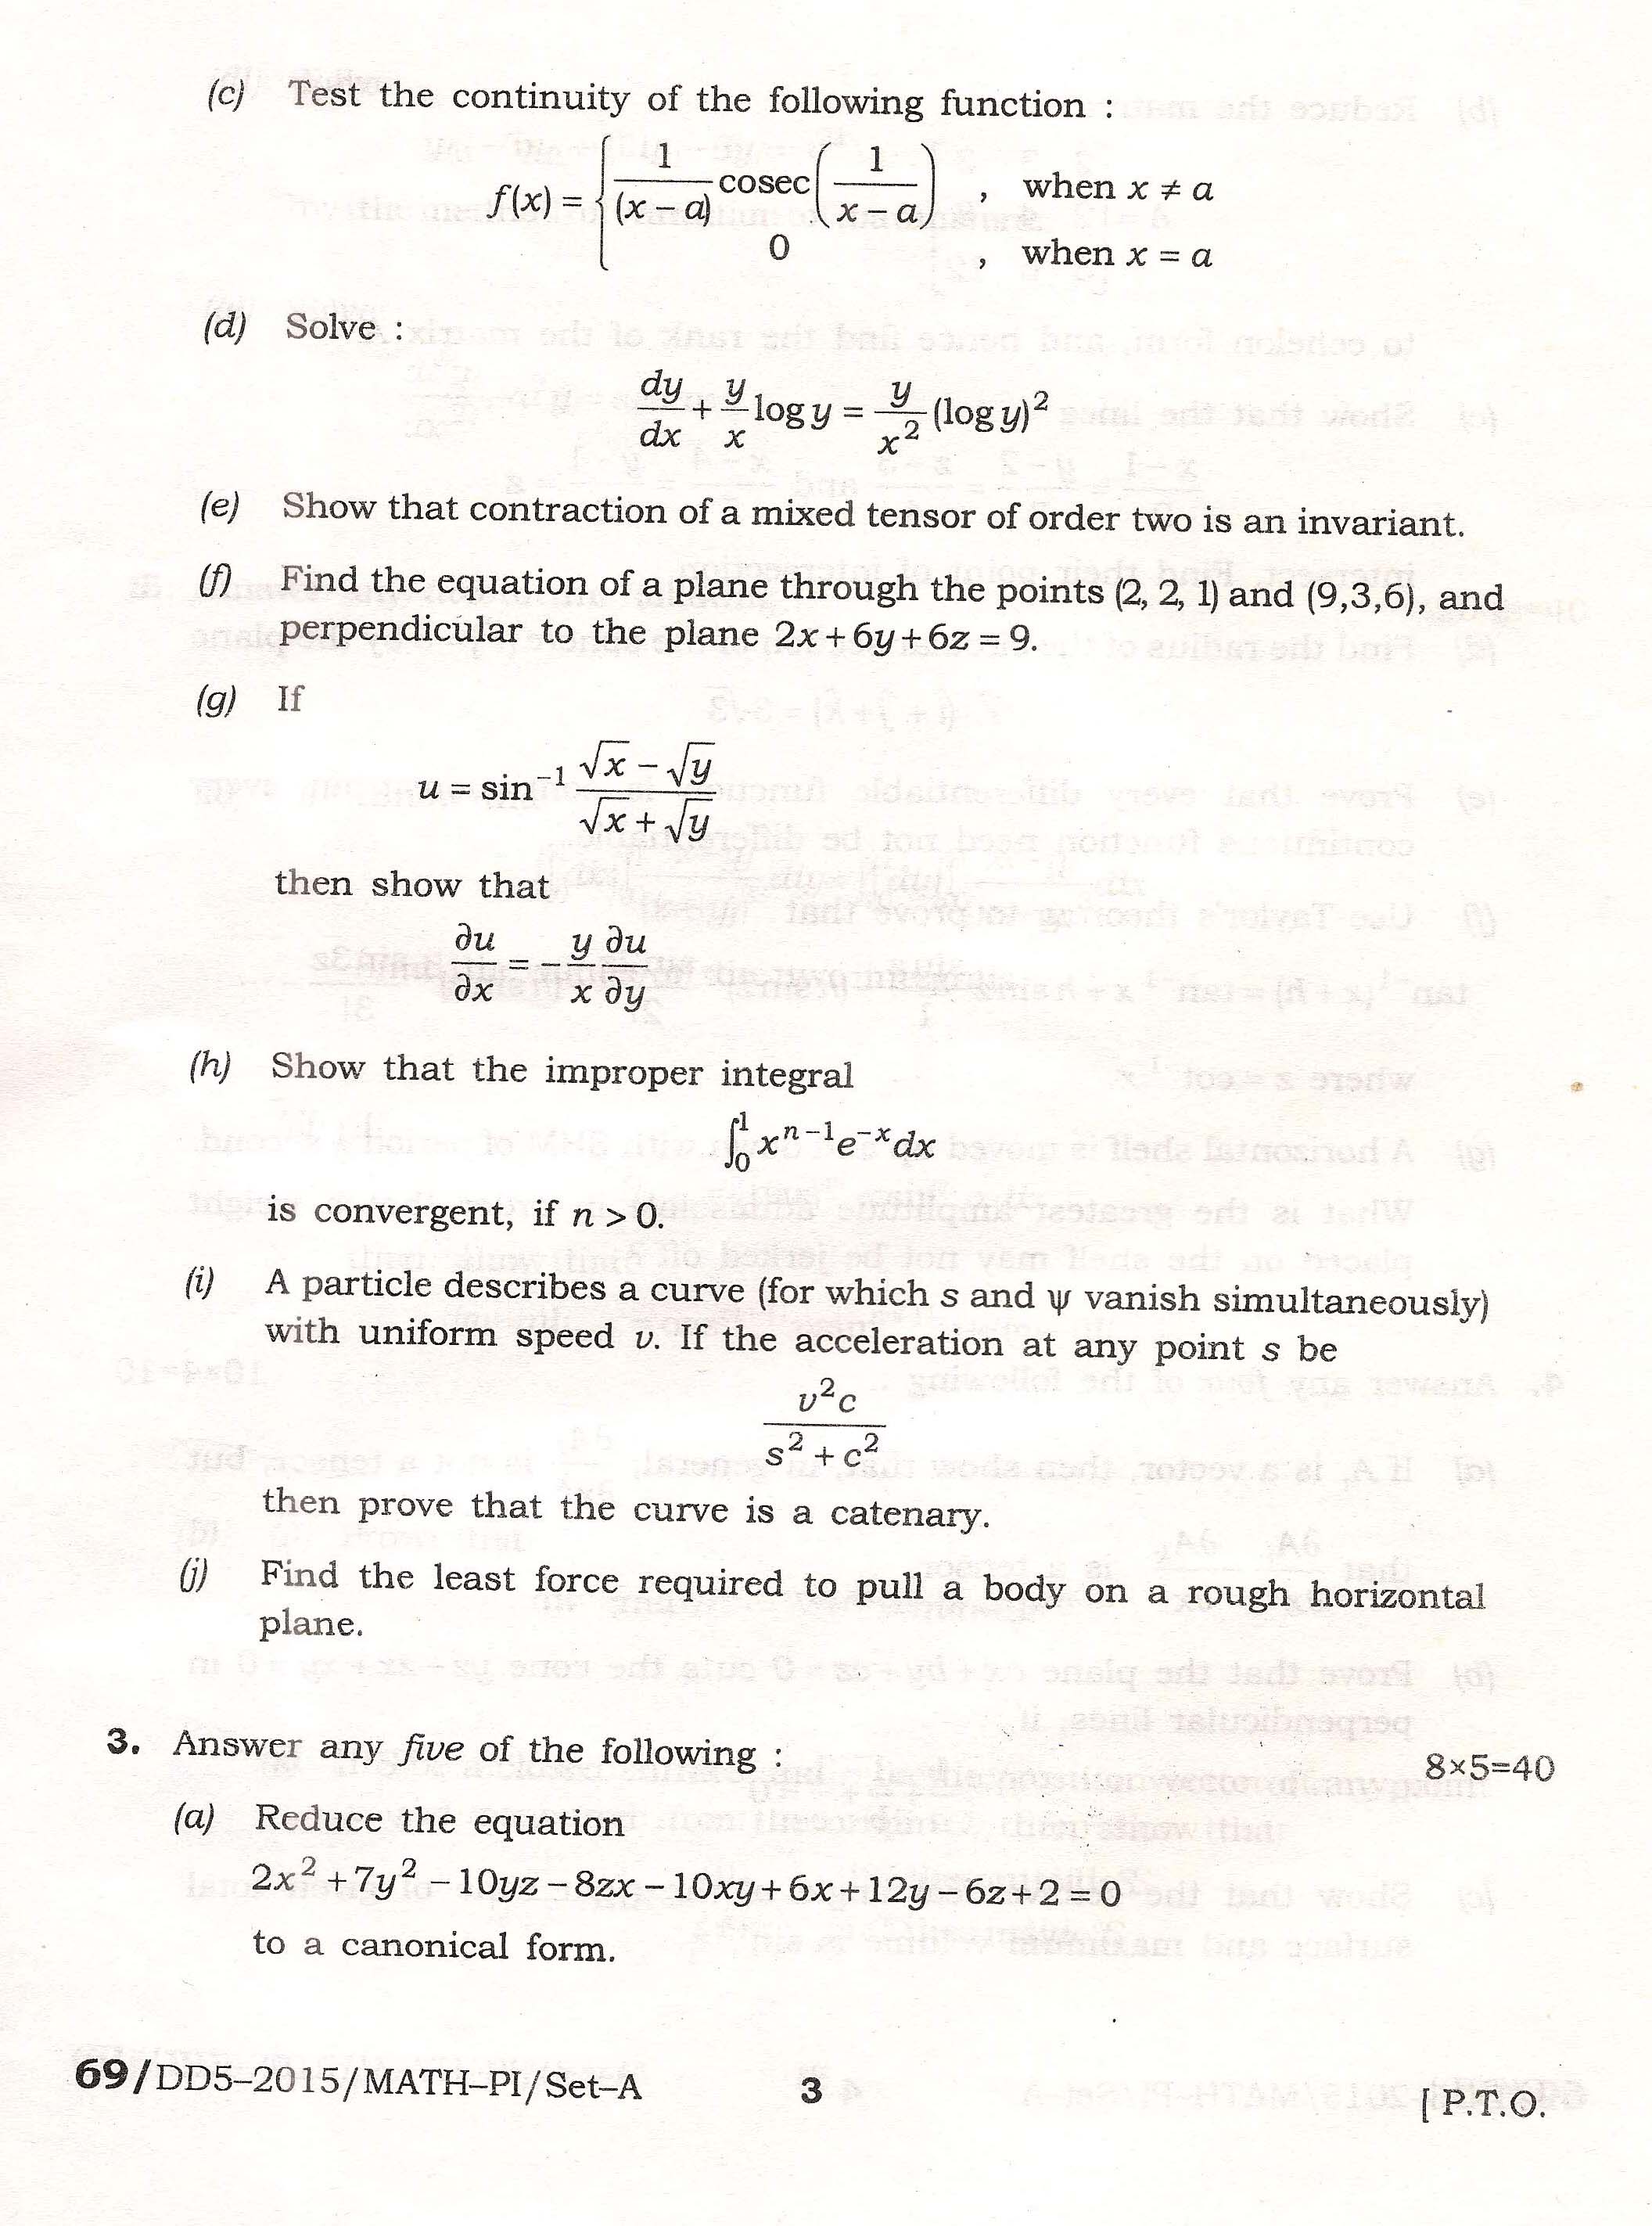 APPSC Combined Competitive Main Exam 2015 Mathematics Paper I 3